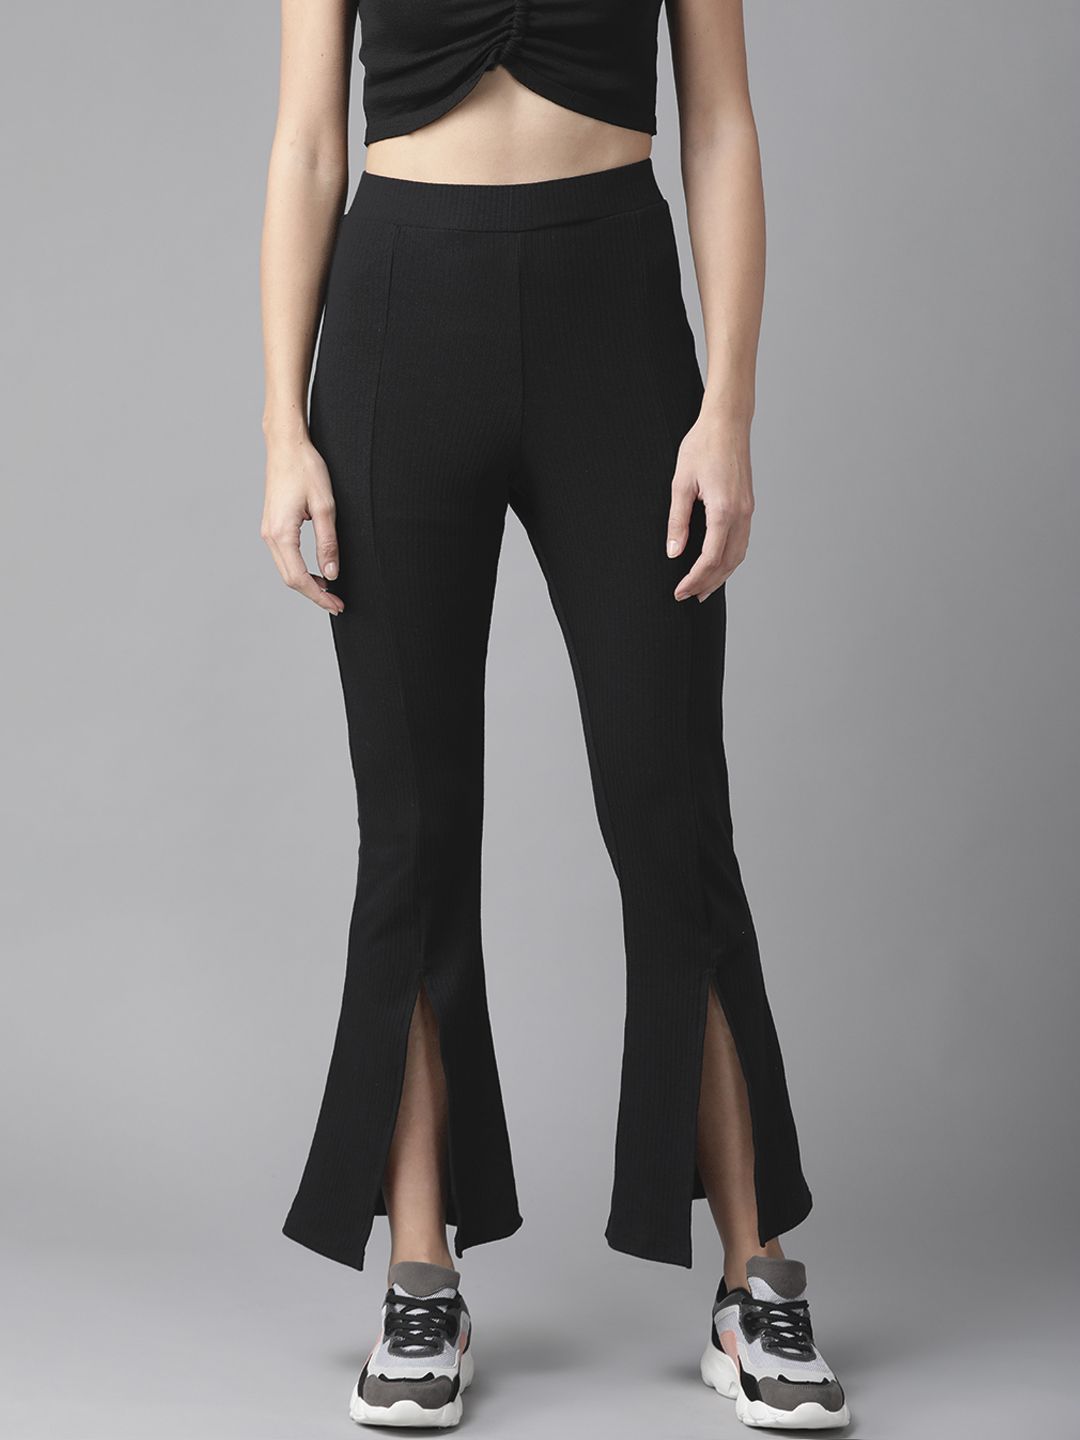 Roadster Women Black Front Slit Trousers Price in India